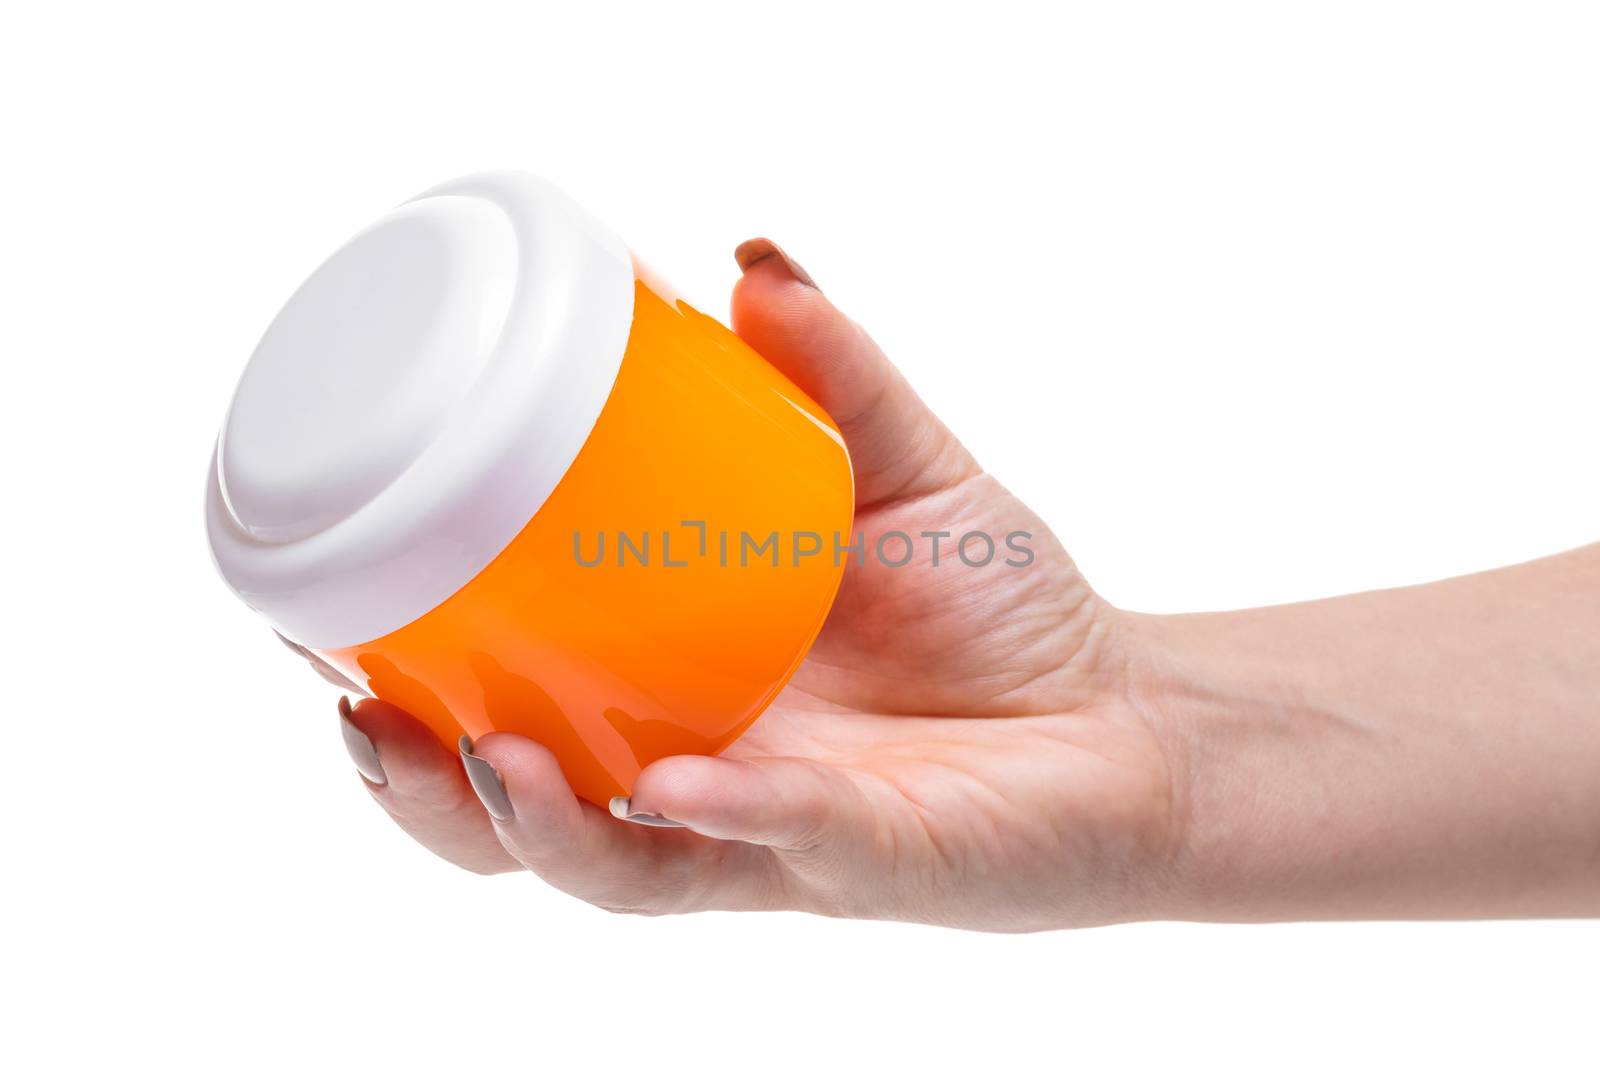 bank with cosmetic cream in hand on white background isolated